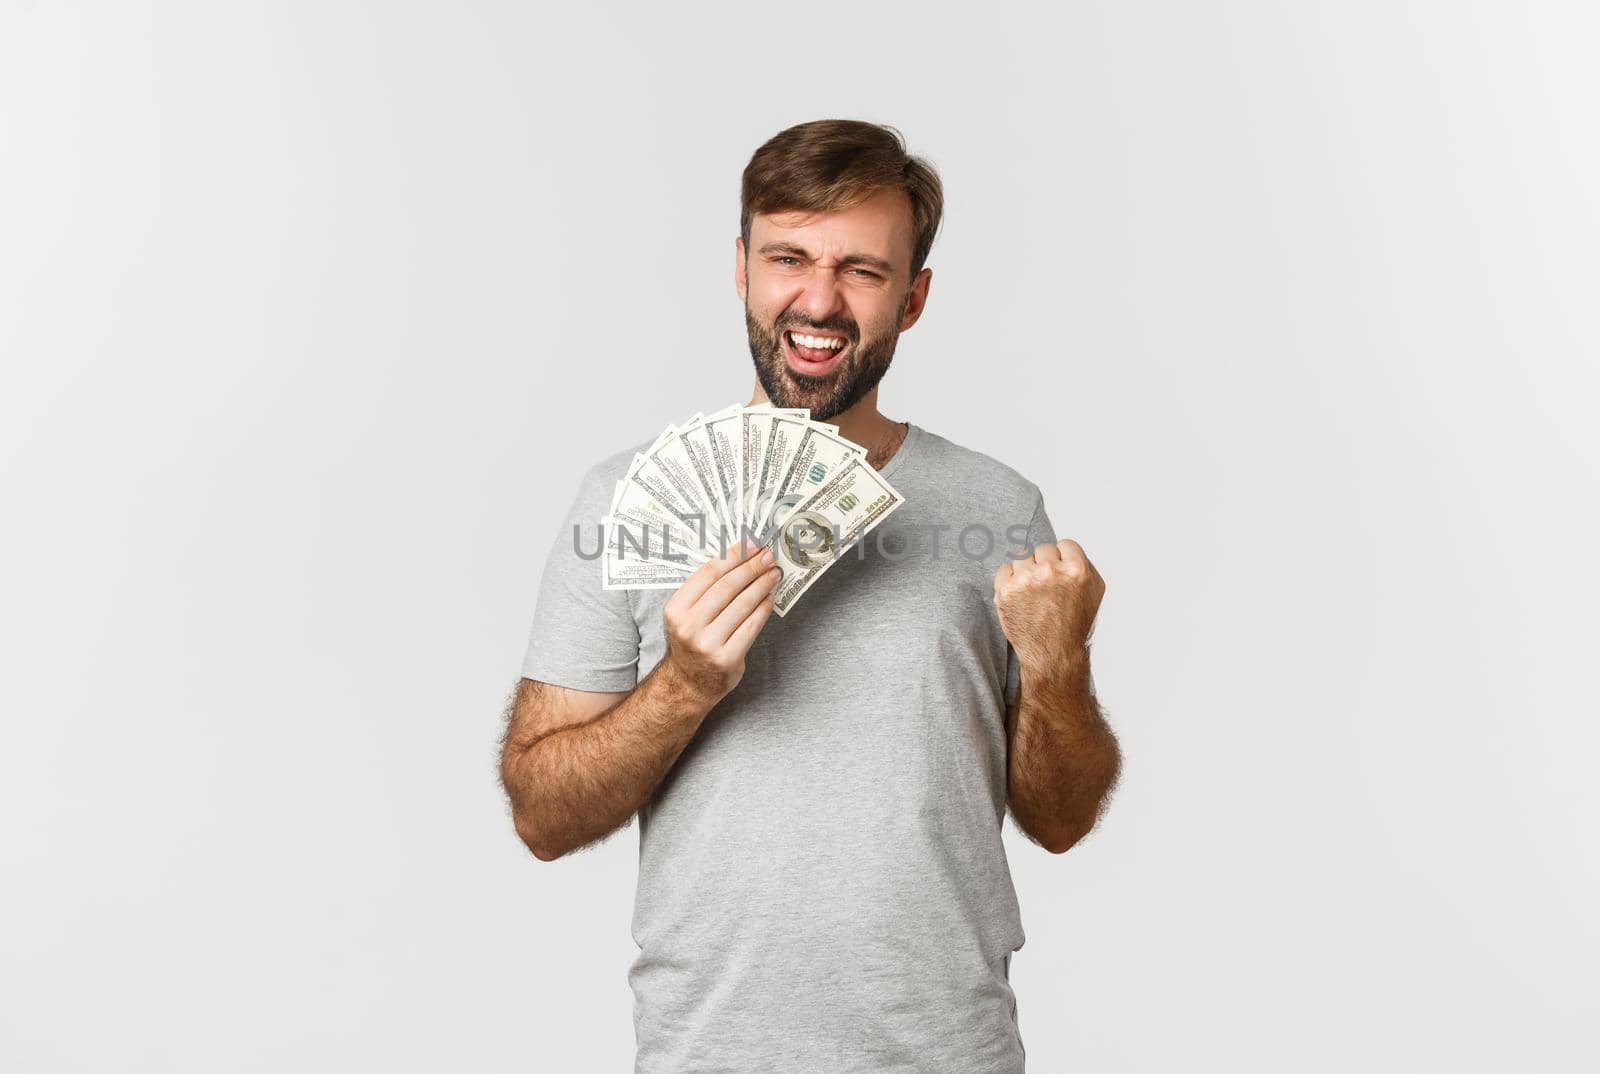 Pleased smiling man with beard, wearing gray t-shirt, rejoicing and winning cash, holding money and celebrating, standing over white background.